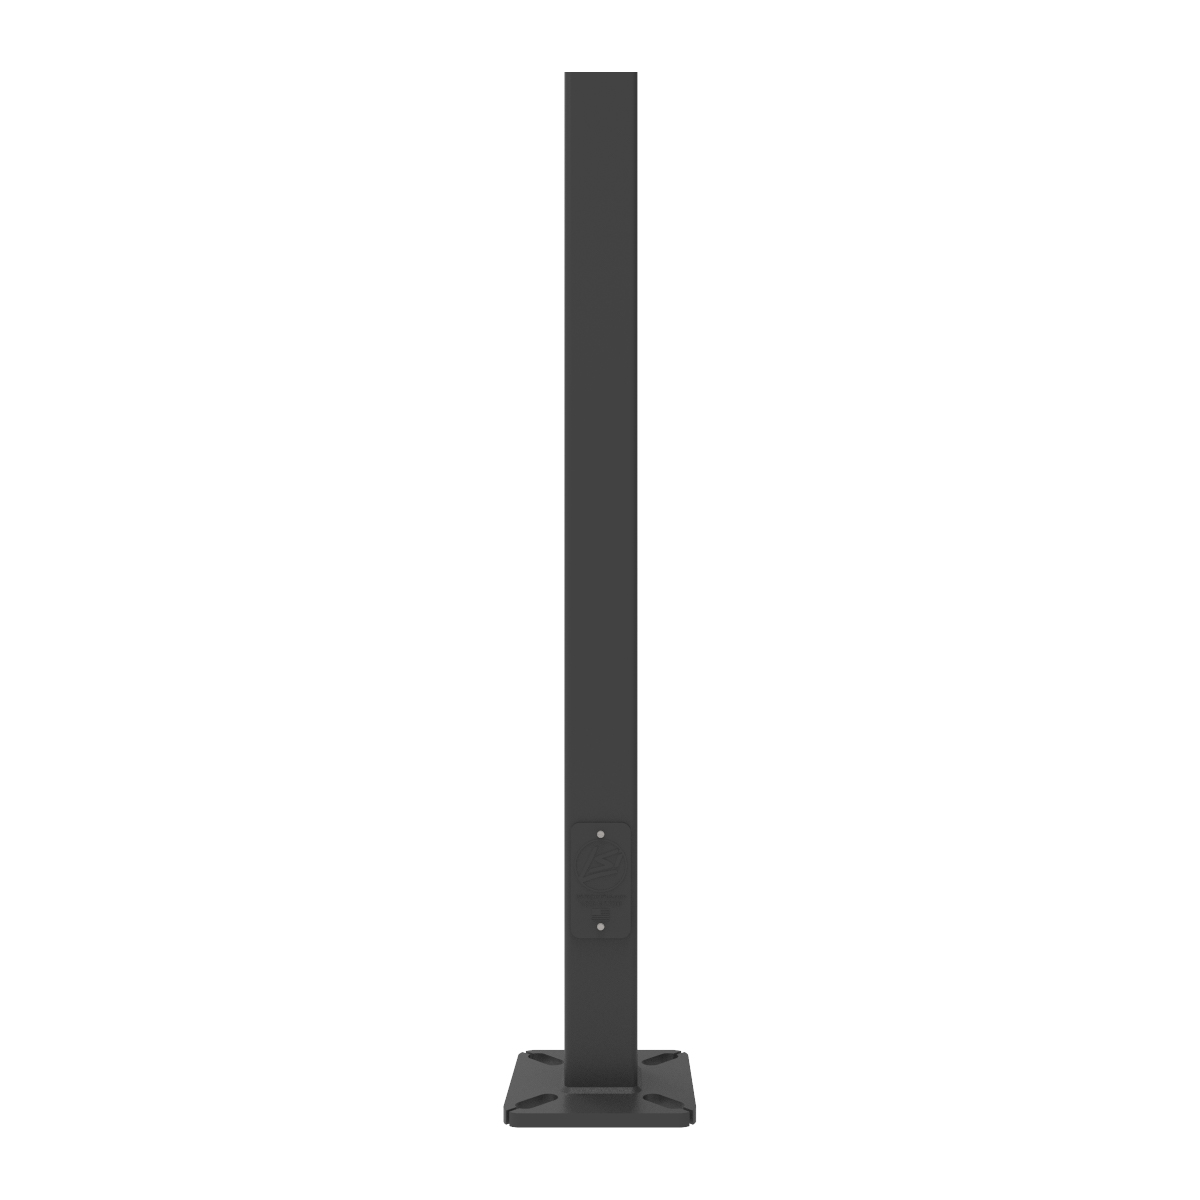 4 in. Square Straight Steel Pole Image